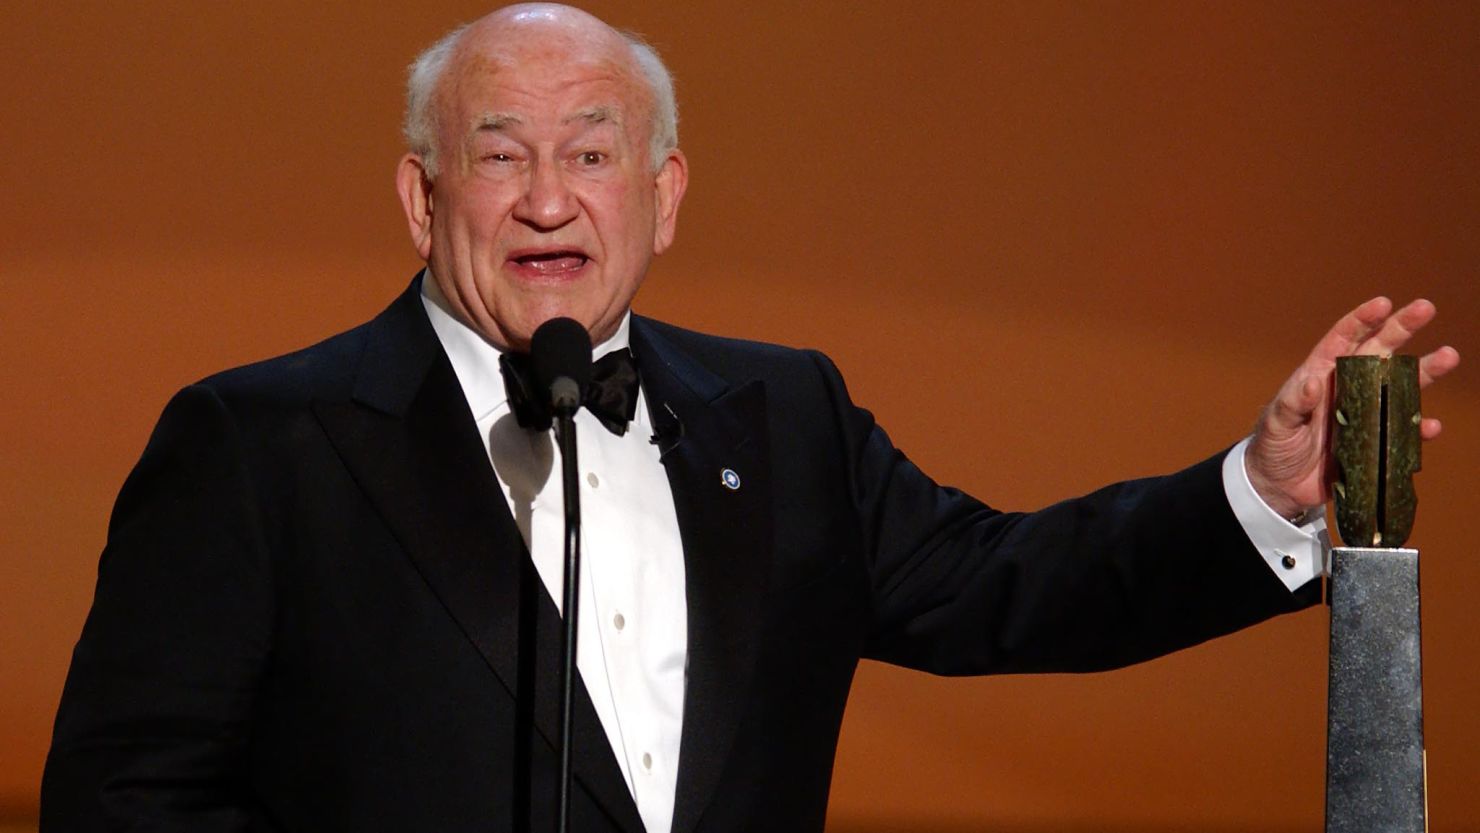 US actor Ed Asner accepts the Life Achievement Award at the 8th Annual Screen Actors Guild Awards in Los Angeles in 2002. 